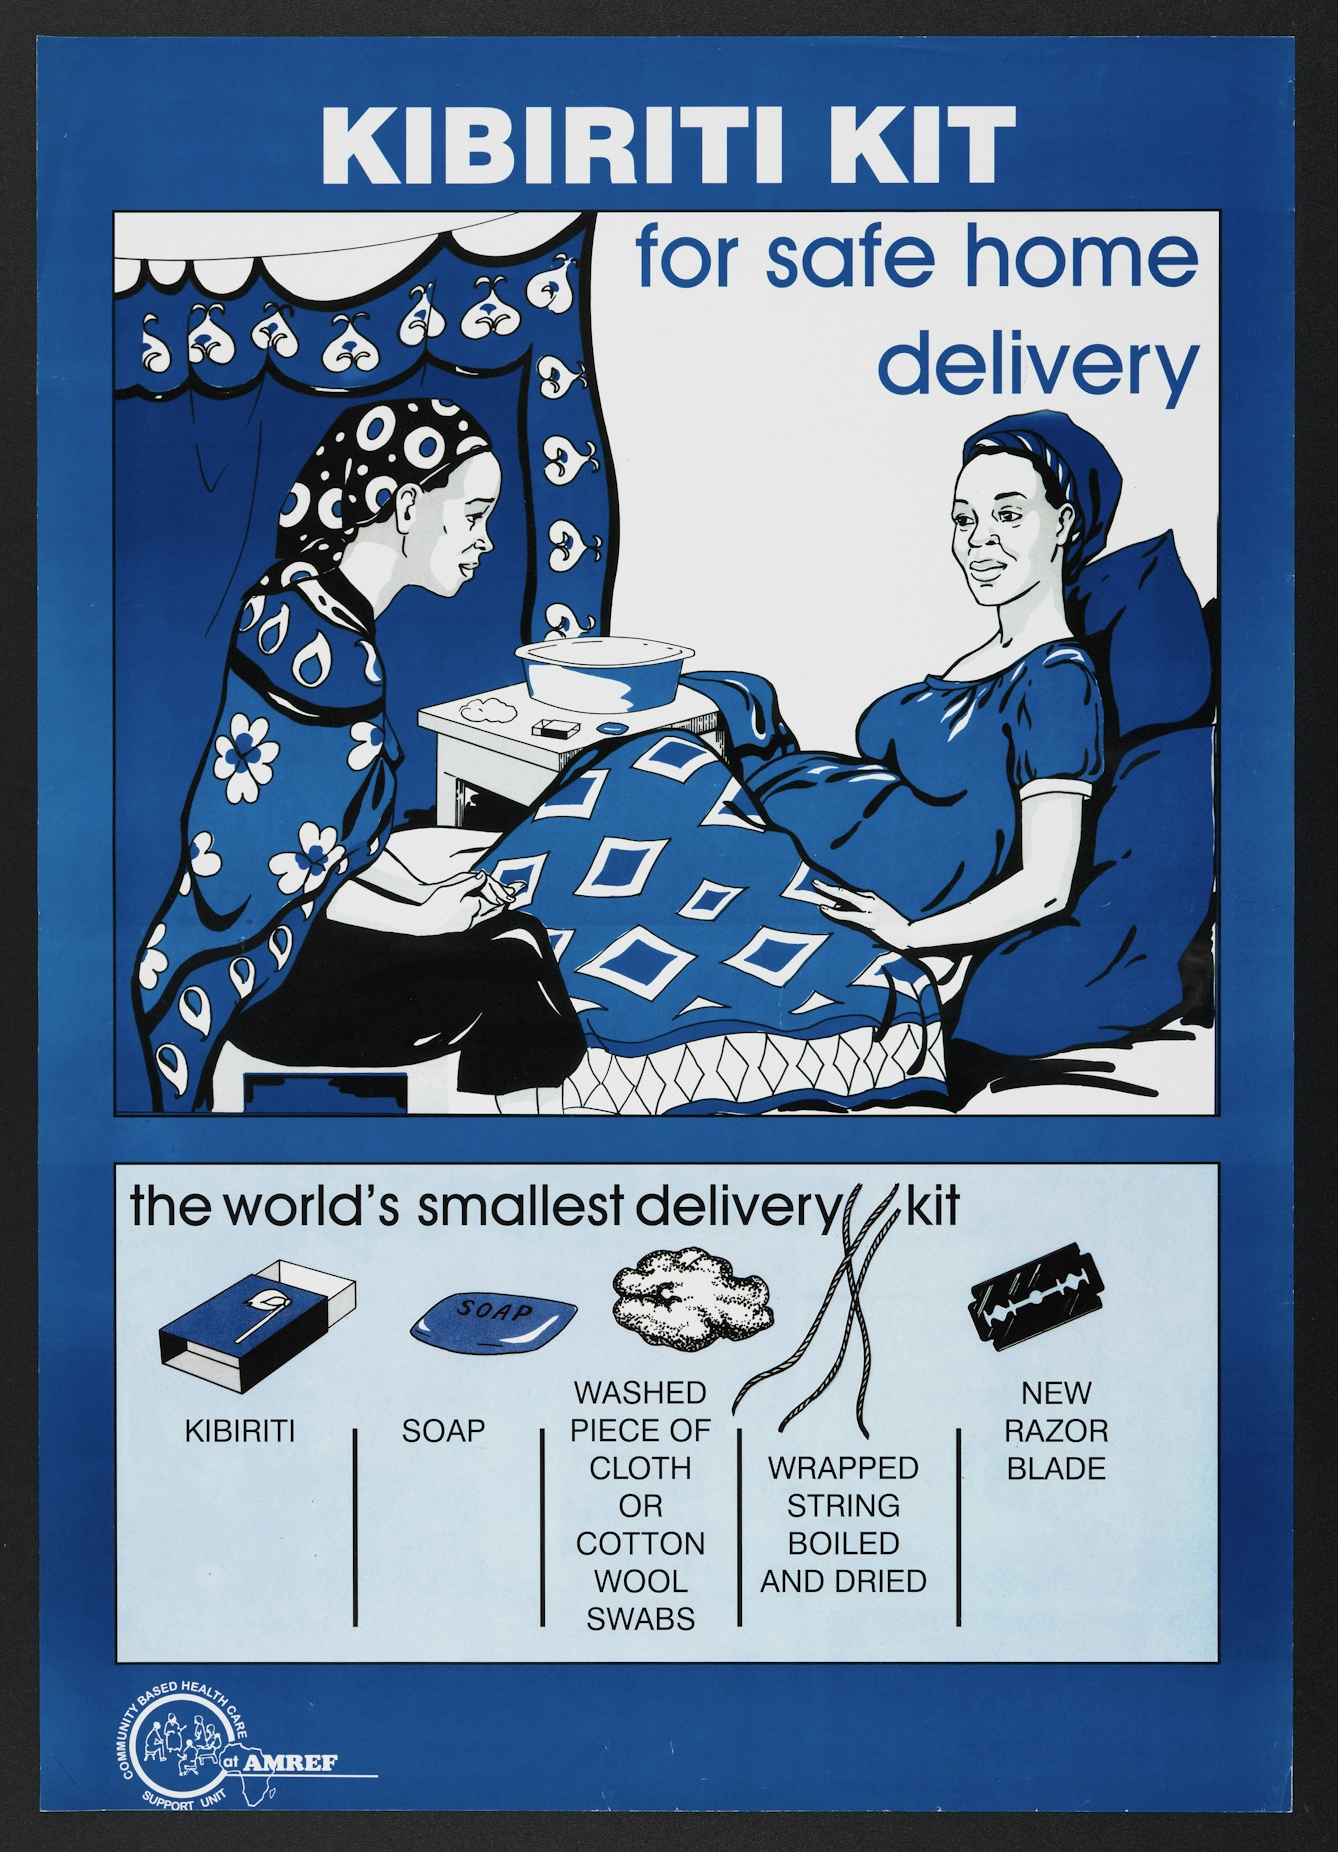 Colour lithograph from 2000 promoting the Kibiriti home birth kit in Kenya, which depicts a midwife tending to a pregnant woman at home. The kit includes 'kibiriti', 'soap', 'washed piece of cloth or cotton wool swabs', 'wrapped string boiled and dried' and 'new razor blade'.